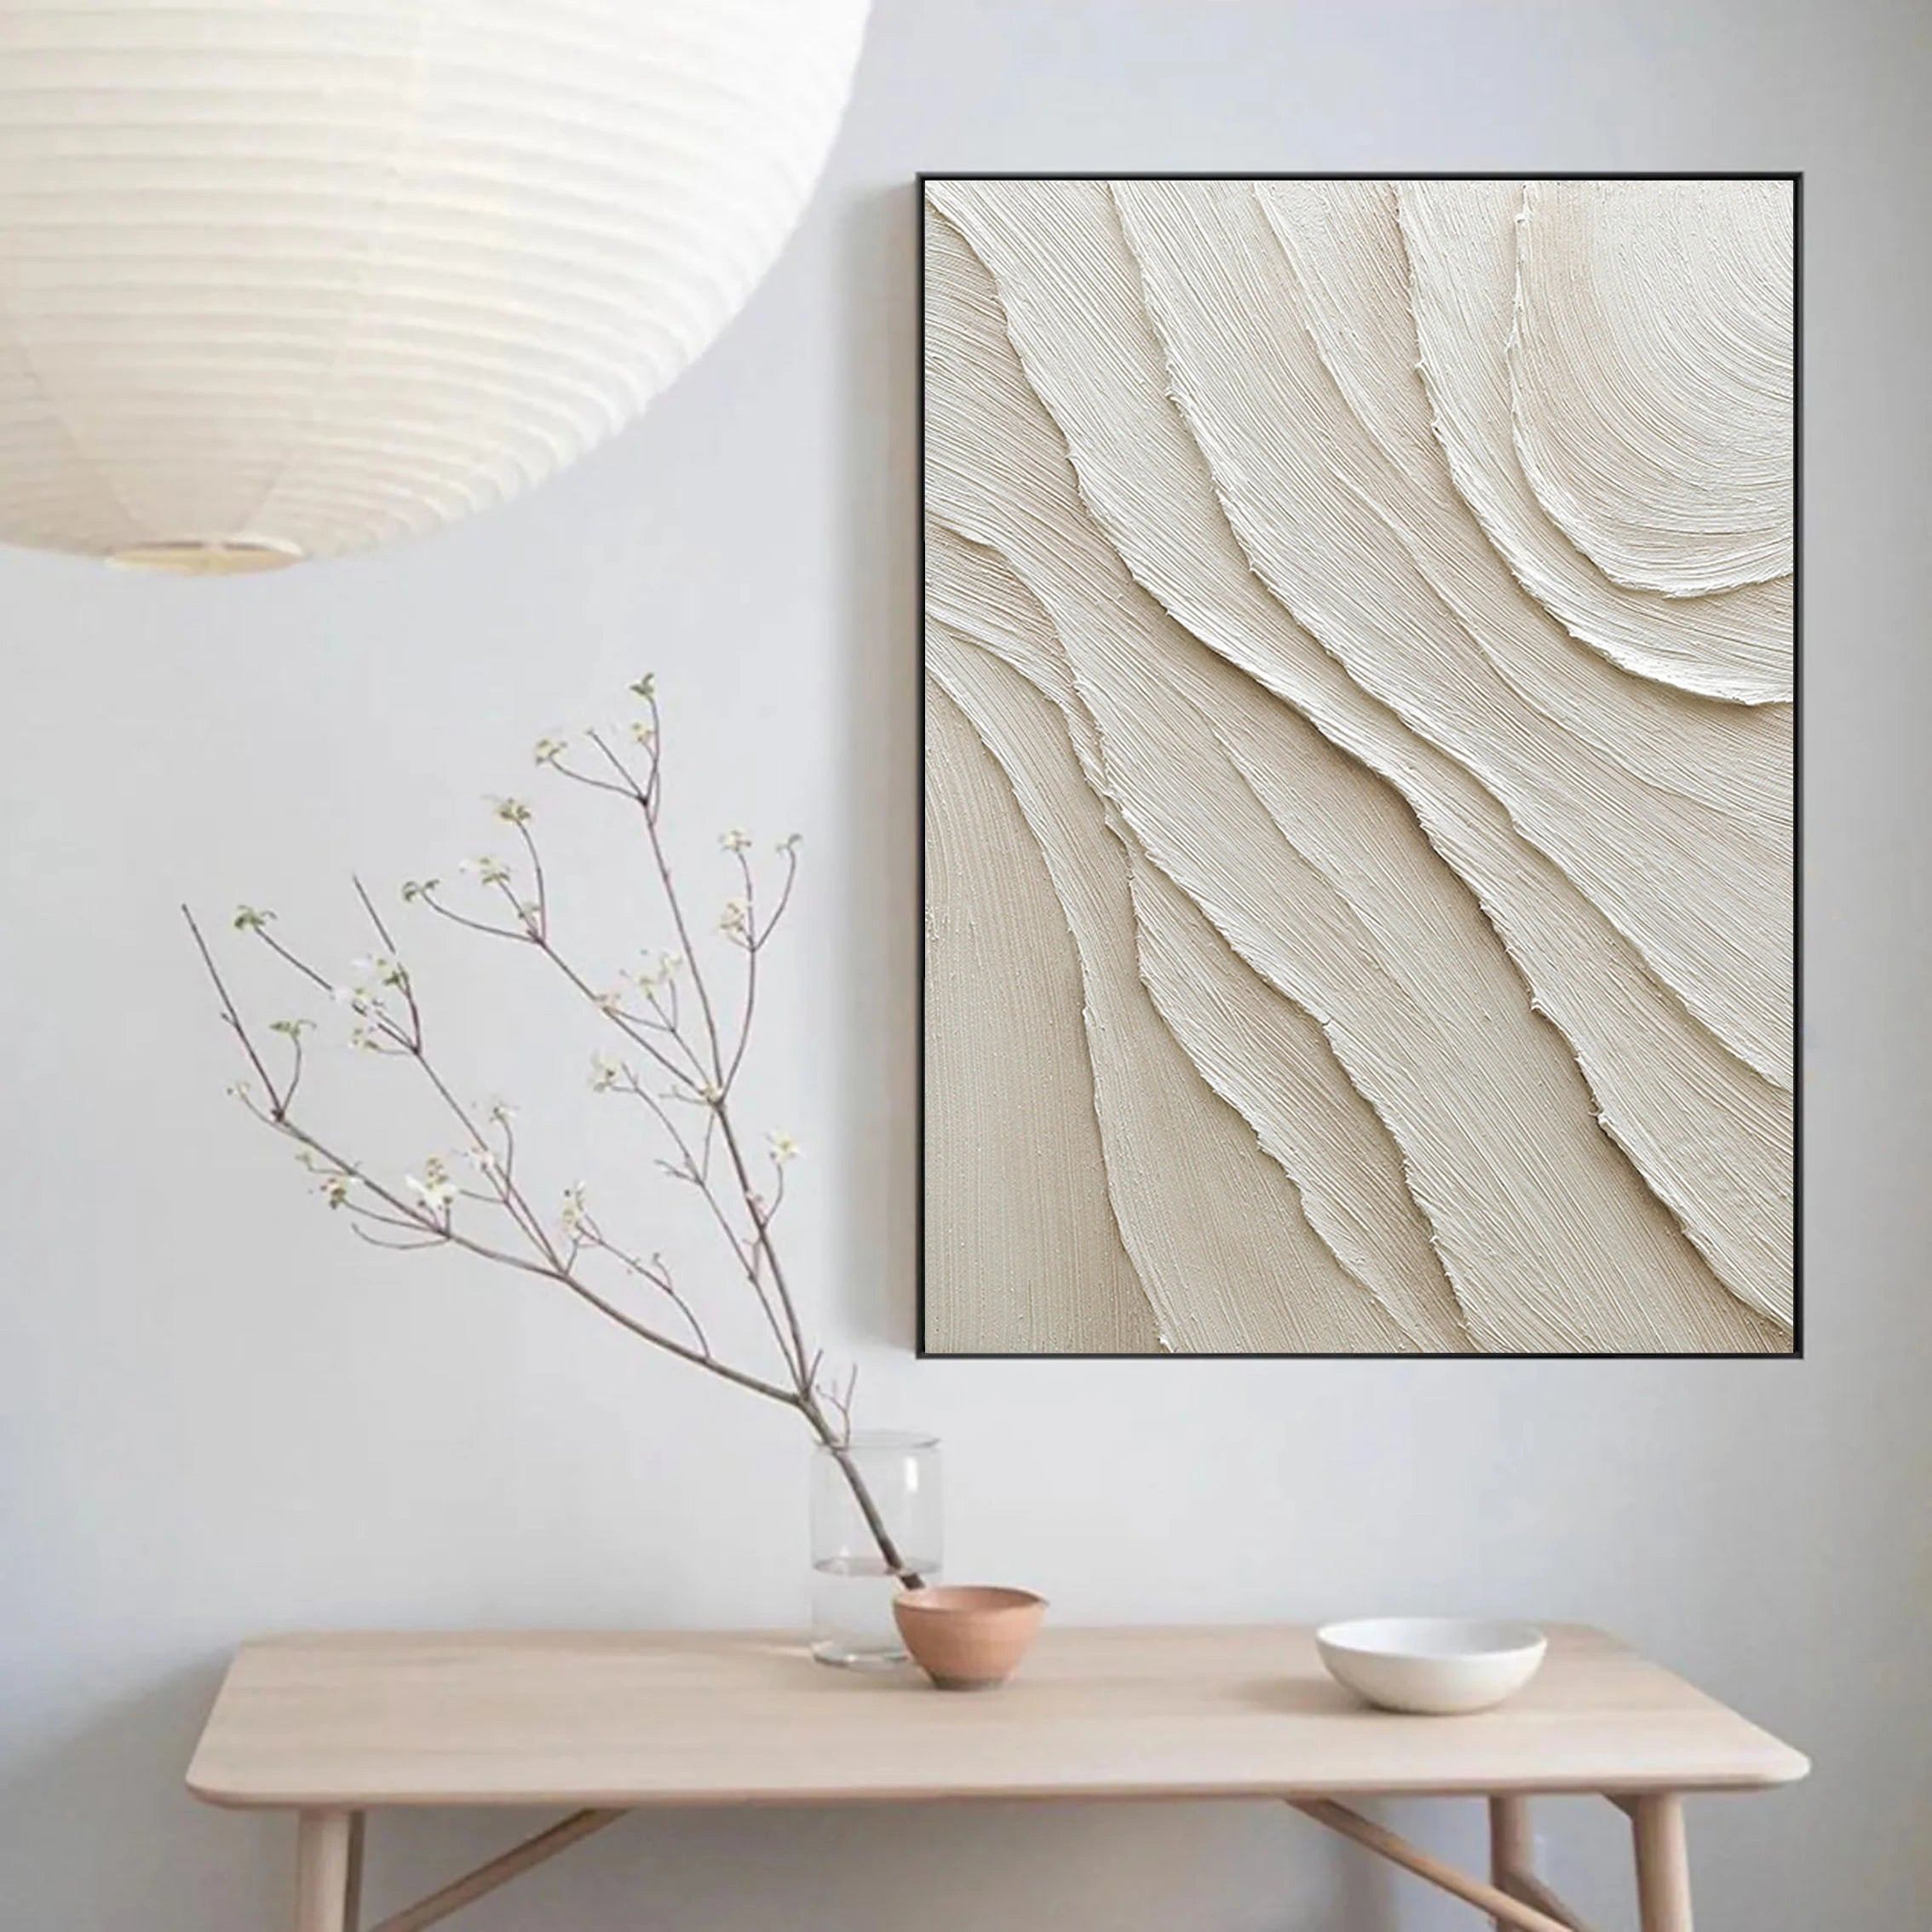 Plaster Art Painting 3D Textured Large Canvas for Living Room/Bedroom